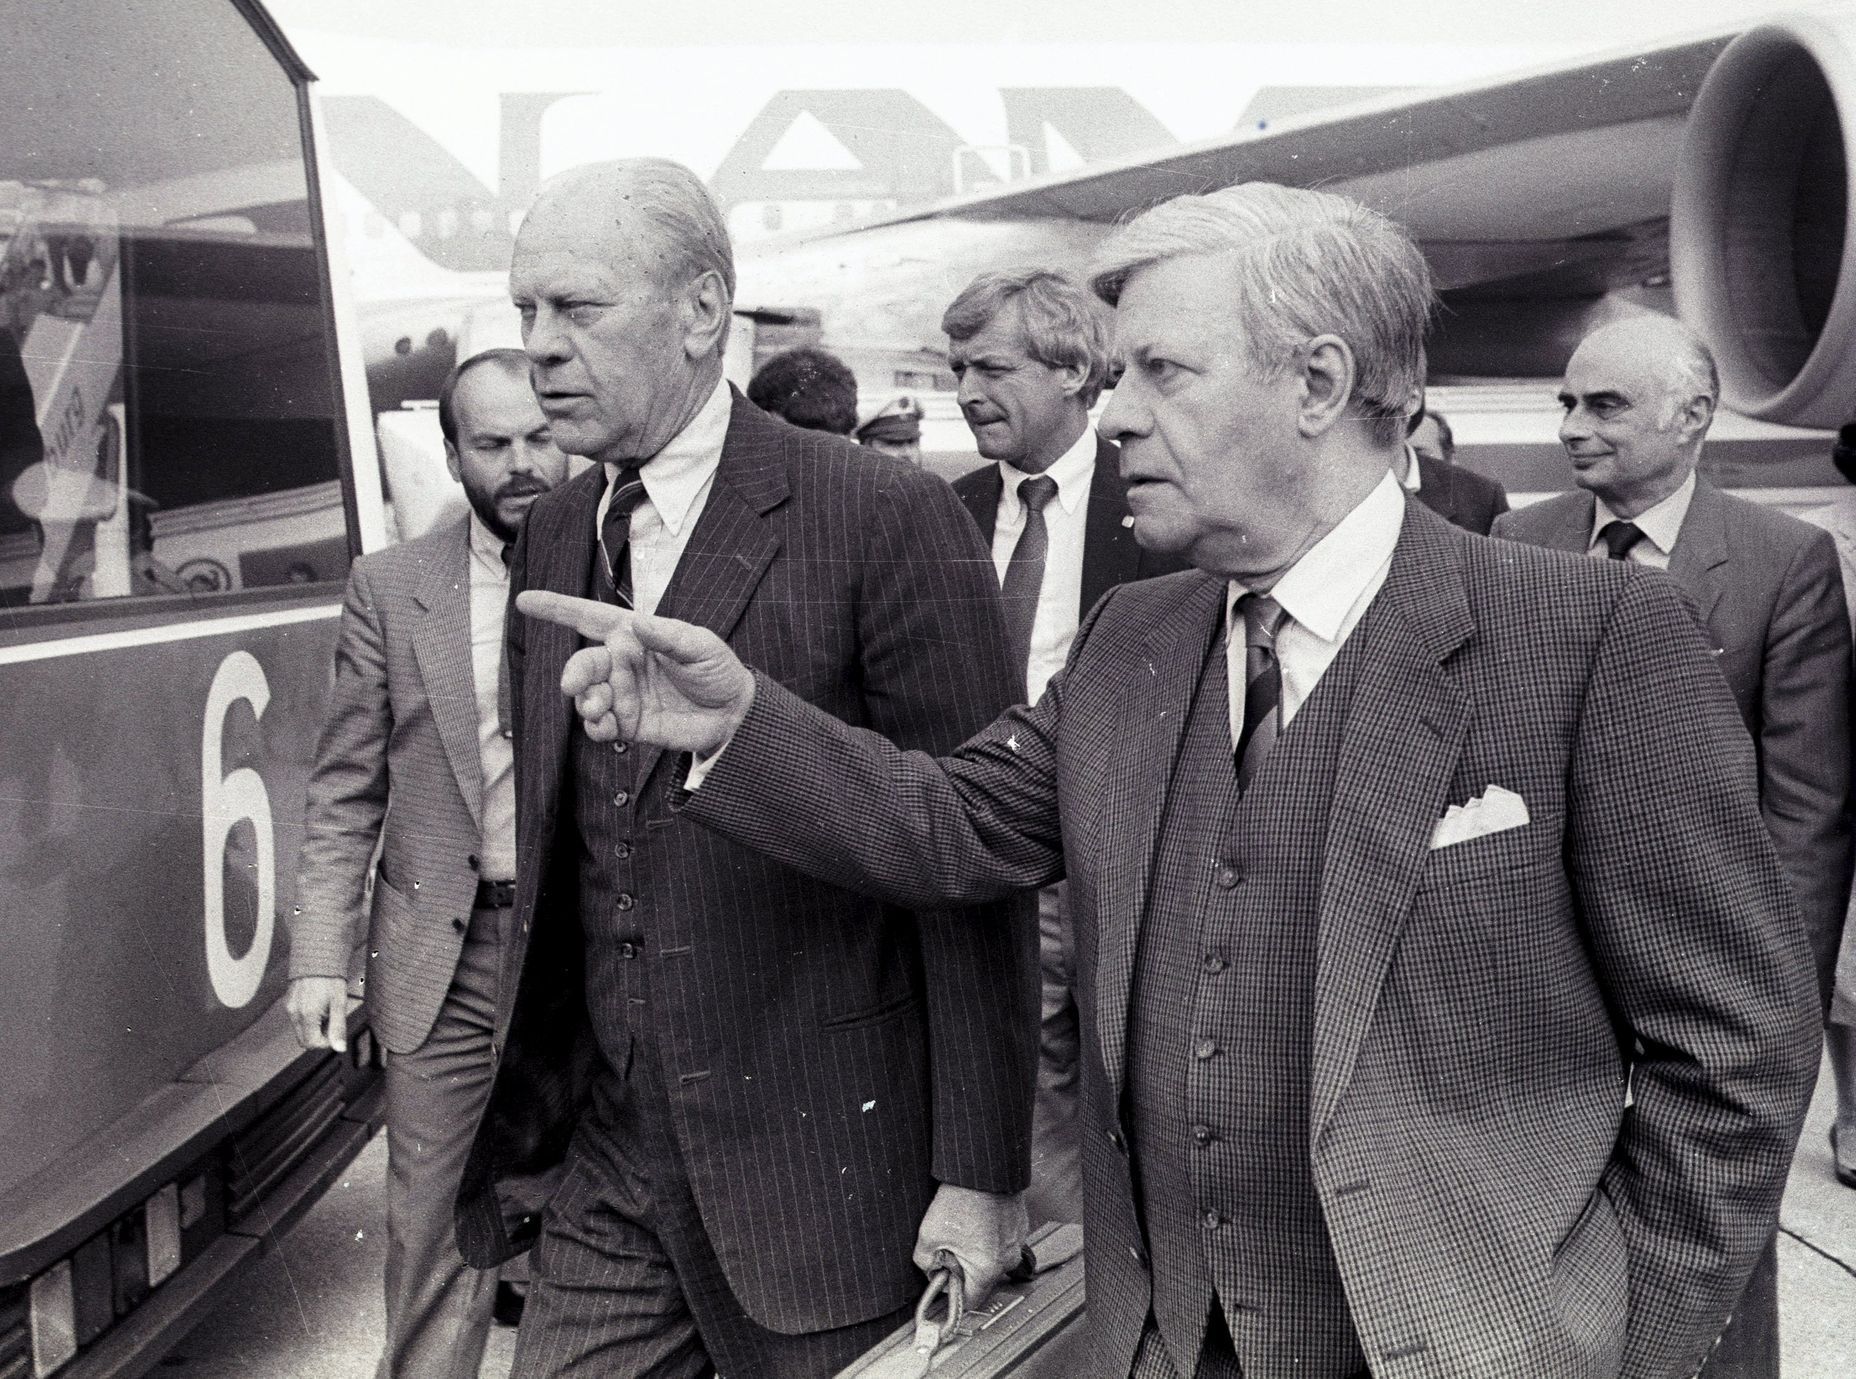 File photo shows Former U.S. President Gerald Ford arriving on a private visit for talks with former West German Chancellor Schmidt, who welcomed him at Hamburg airport